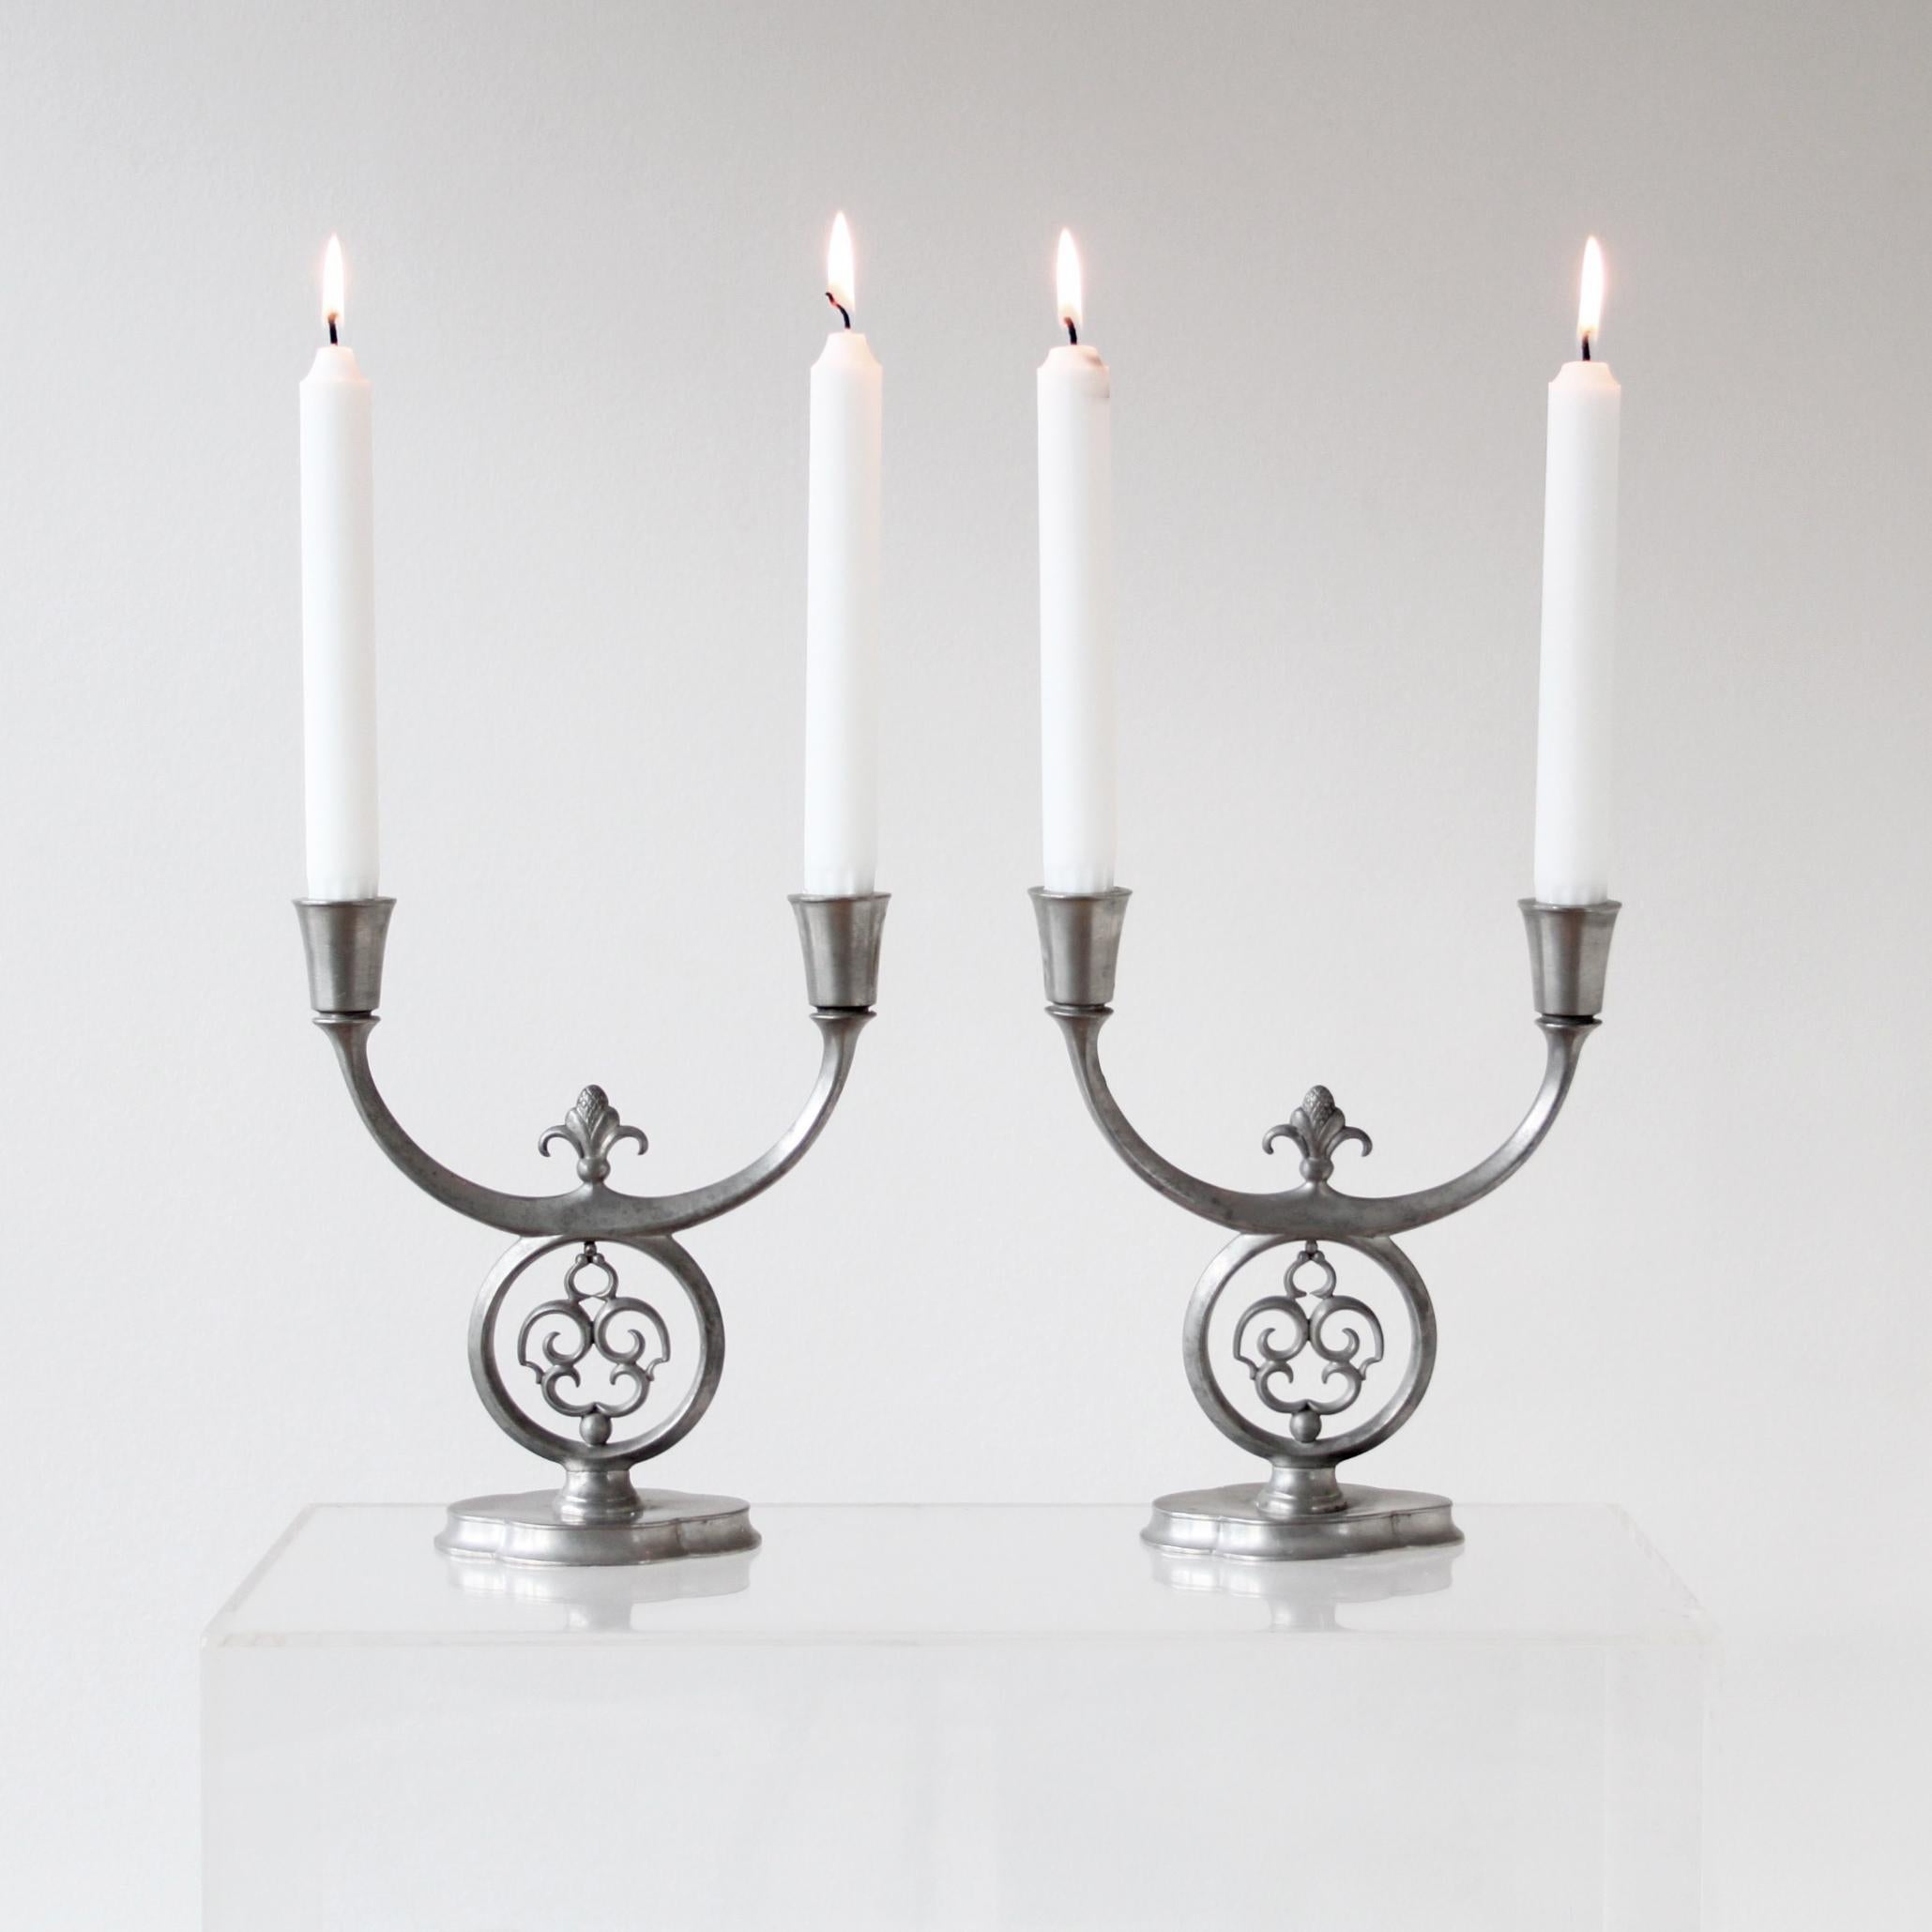 Just Andersen - Scandinavian modern.

A early a pair of pewter candelabras with two arms, Dessin 1171, manufactured in Denmark between 1918-1929. The candelabras have very fine decoration with hammered and hand-crafted details. 

Each candelabra